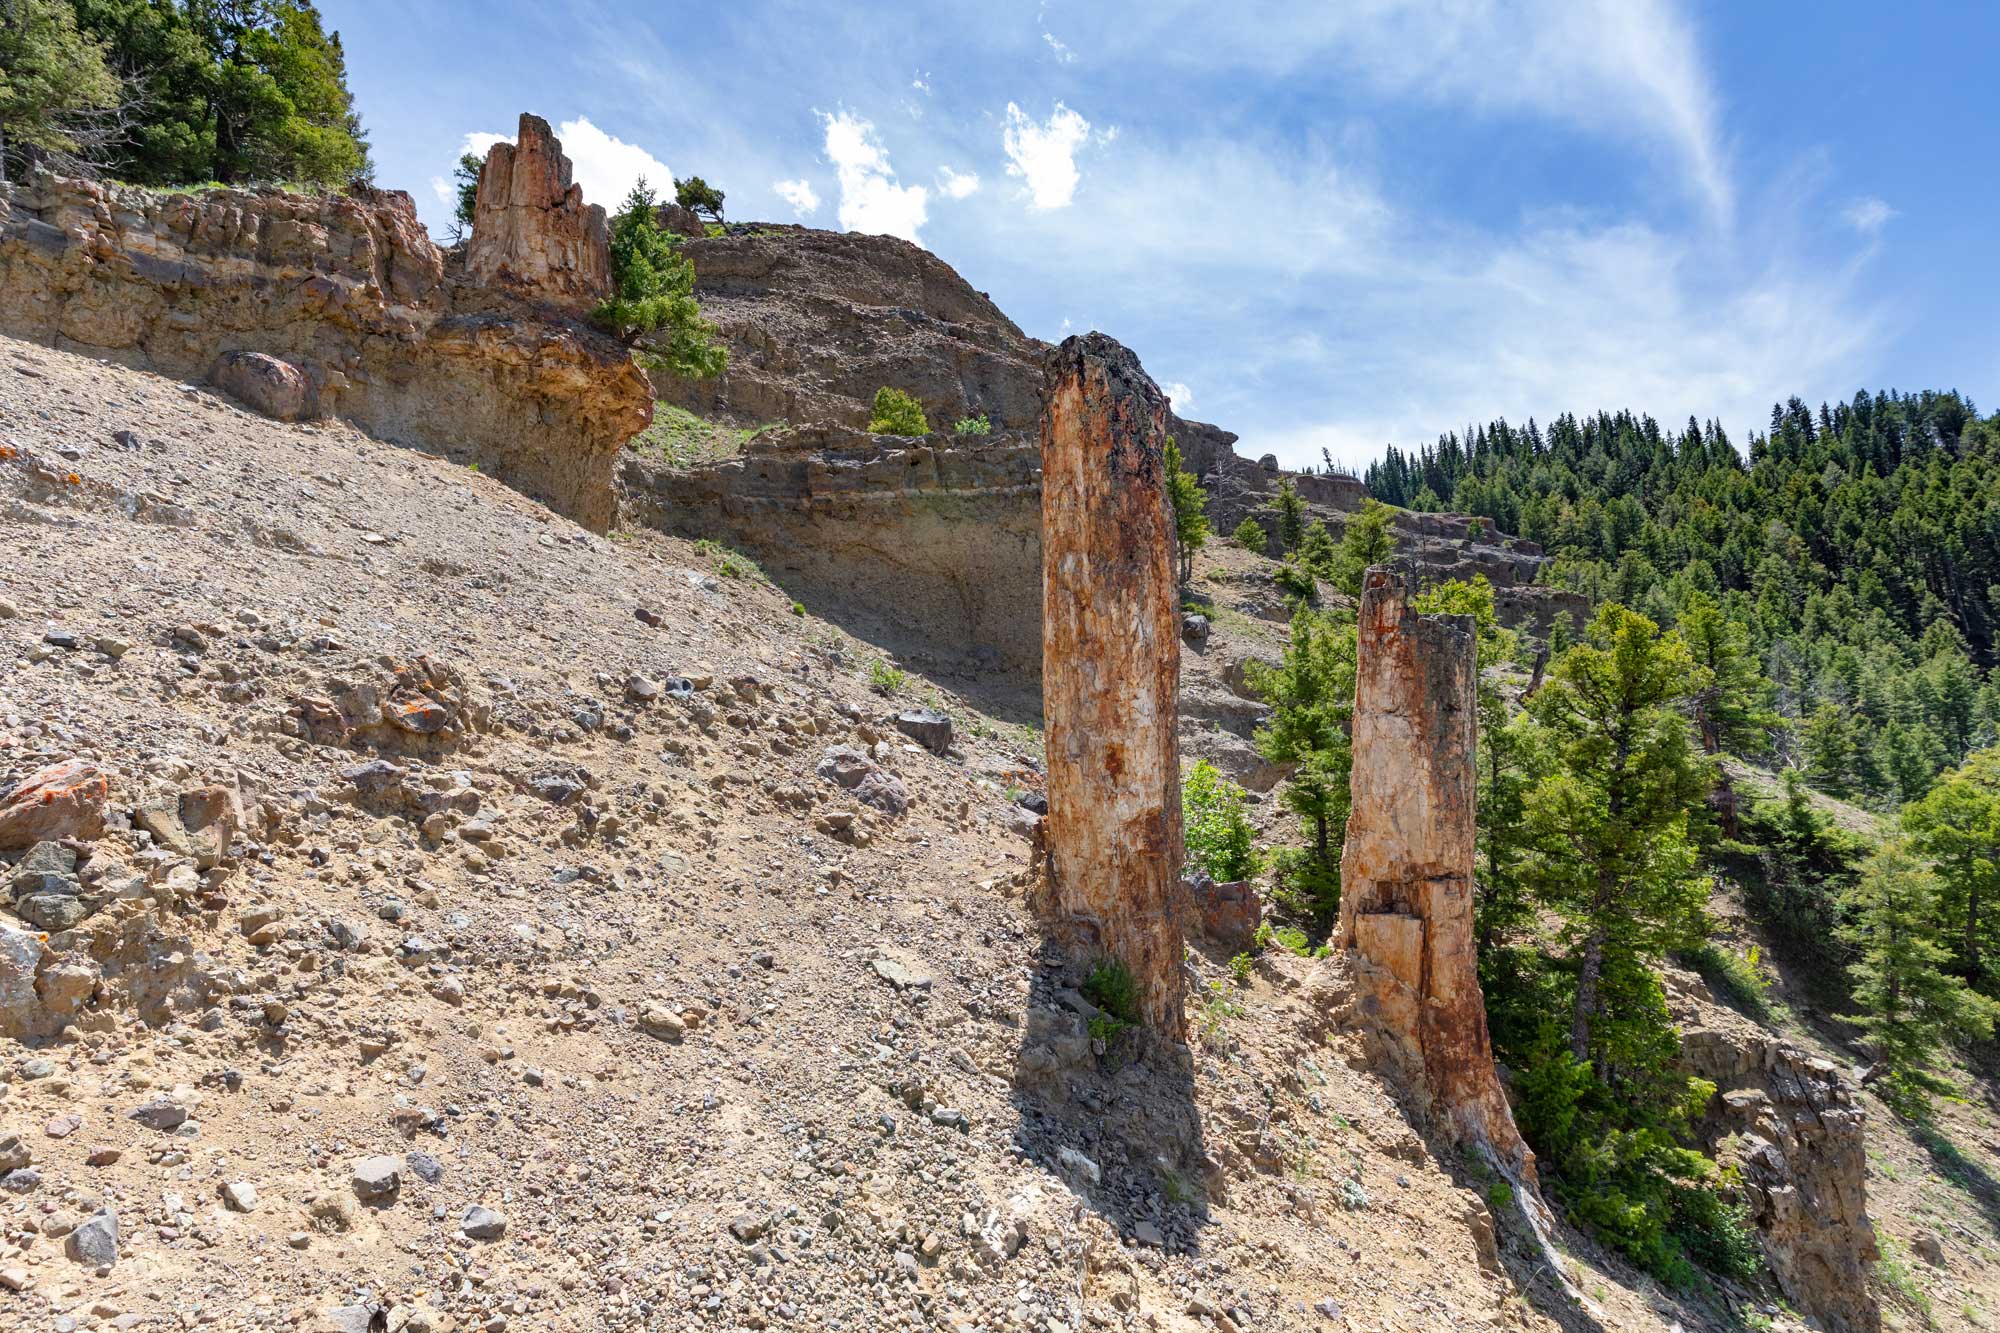 Photograph of upright tree stumps at Specimen Ridge, Yellowstone National Park, Wyoming. Th photo shows two tall petrified tree stumps on a slope. Above them, a third, shorter tree stump can be seen on a ledge. In the background, hill slopes are covered with living conifers.